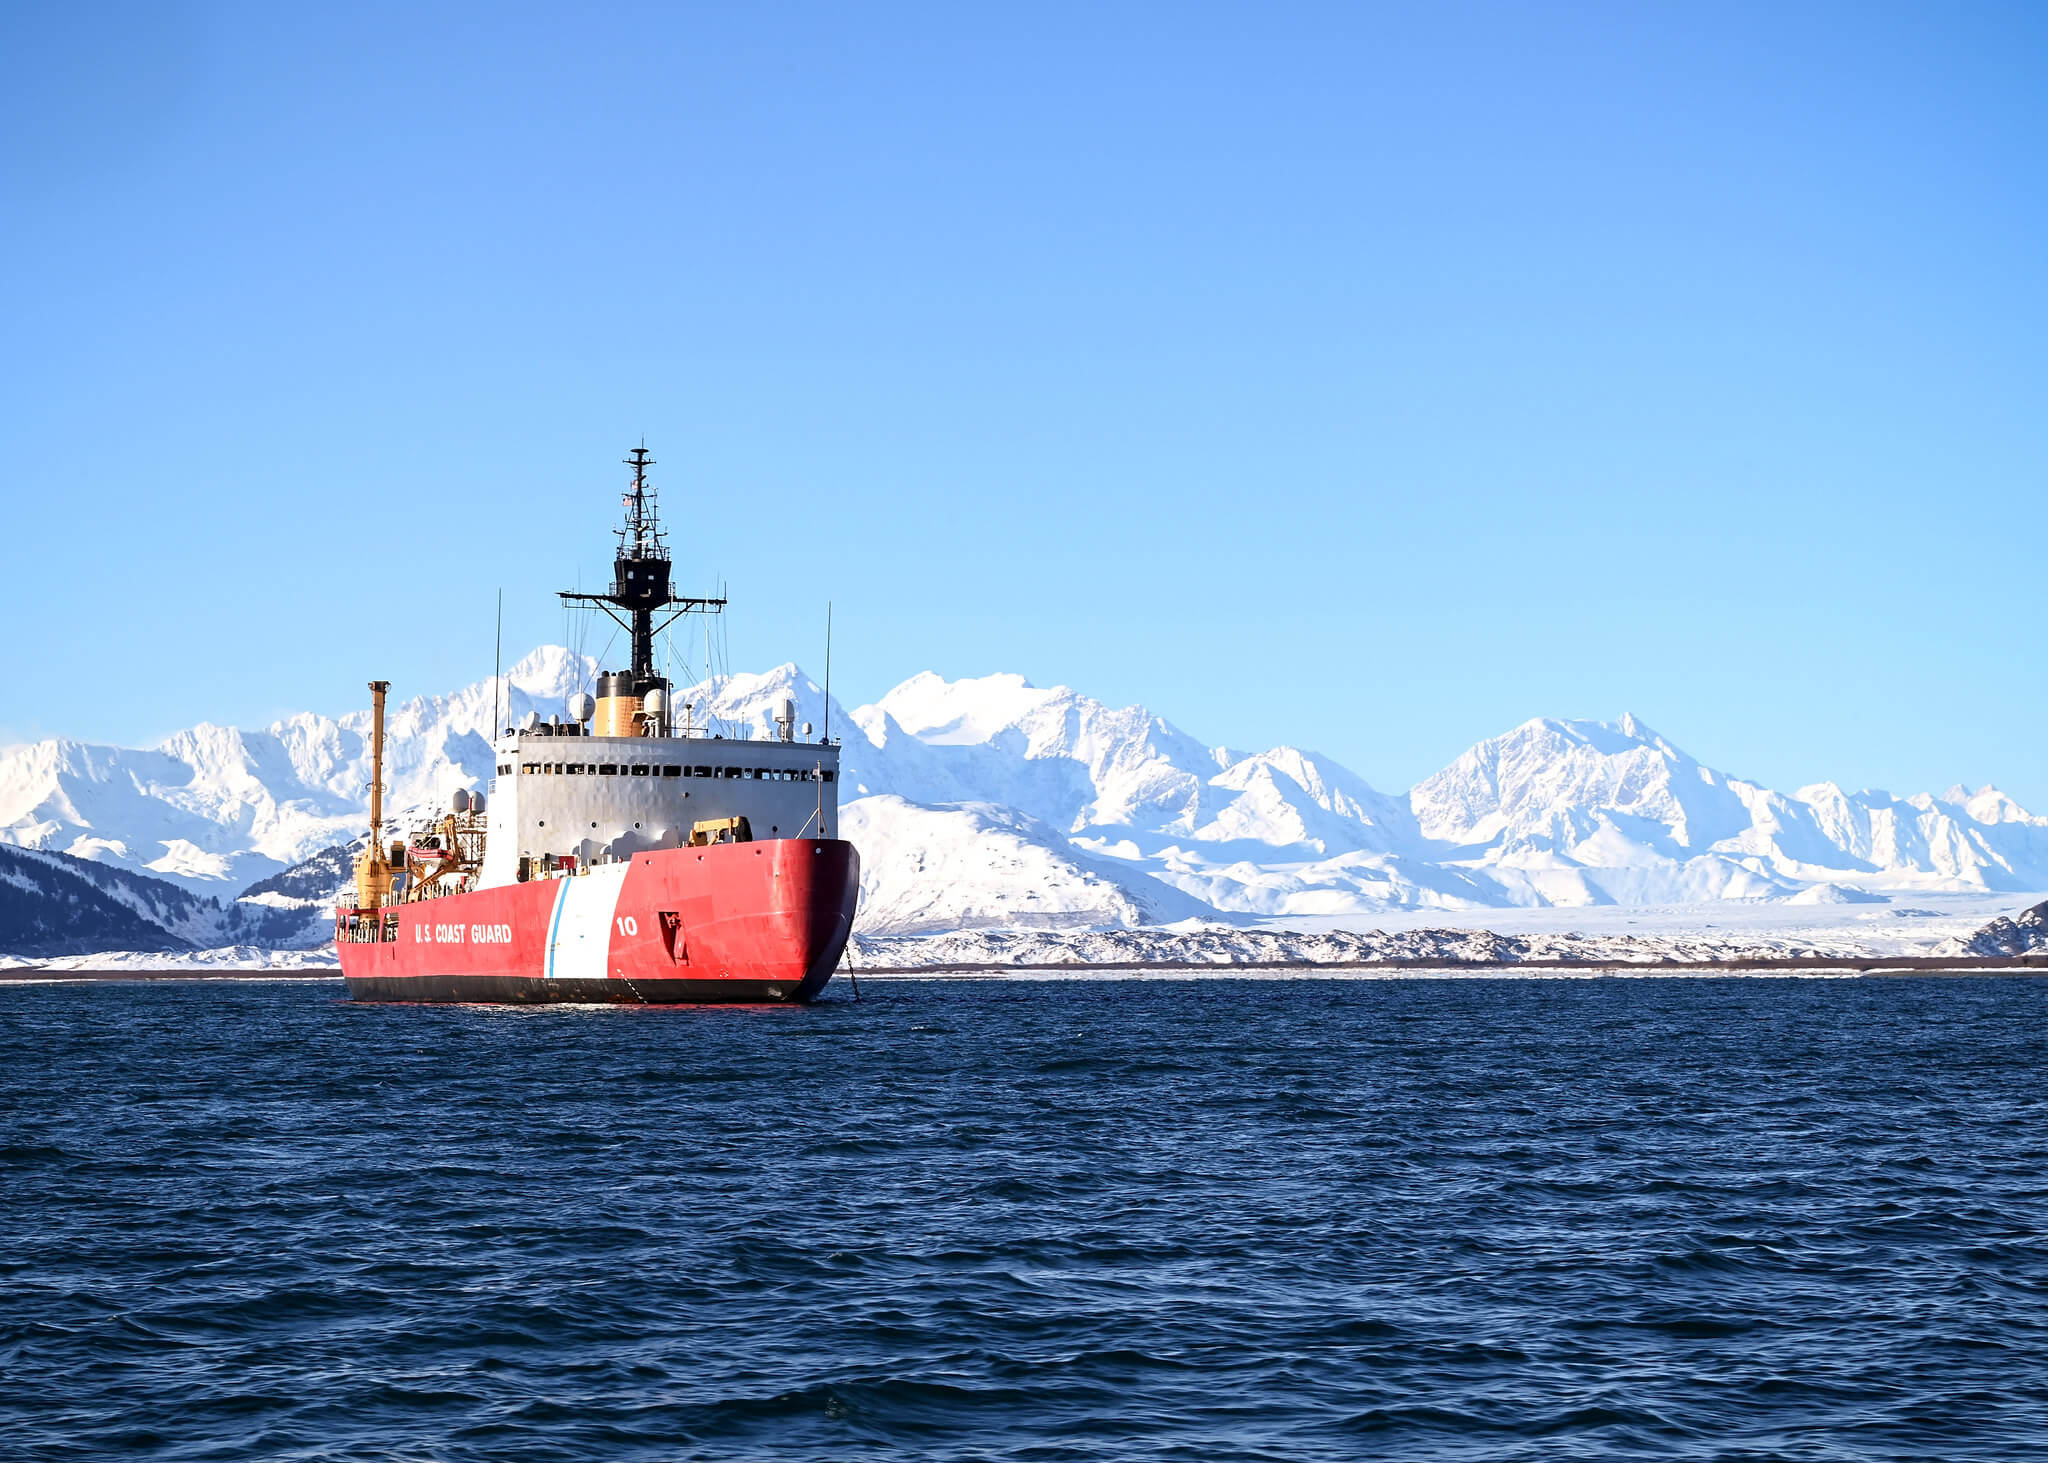 US Coast Guard Cutter Polar Star sits at anchor in Taylor Bay, Alaska, during Arctic deployment, 22 February 2021 © US Into-Pacific Command / Flickr